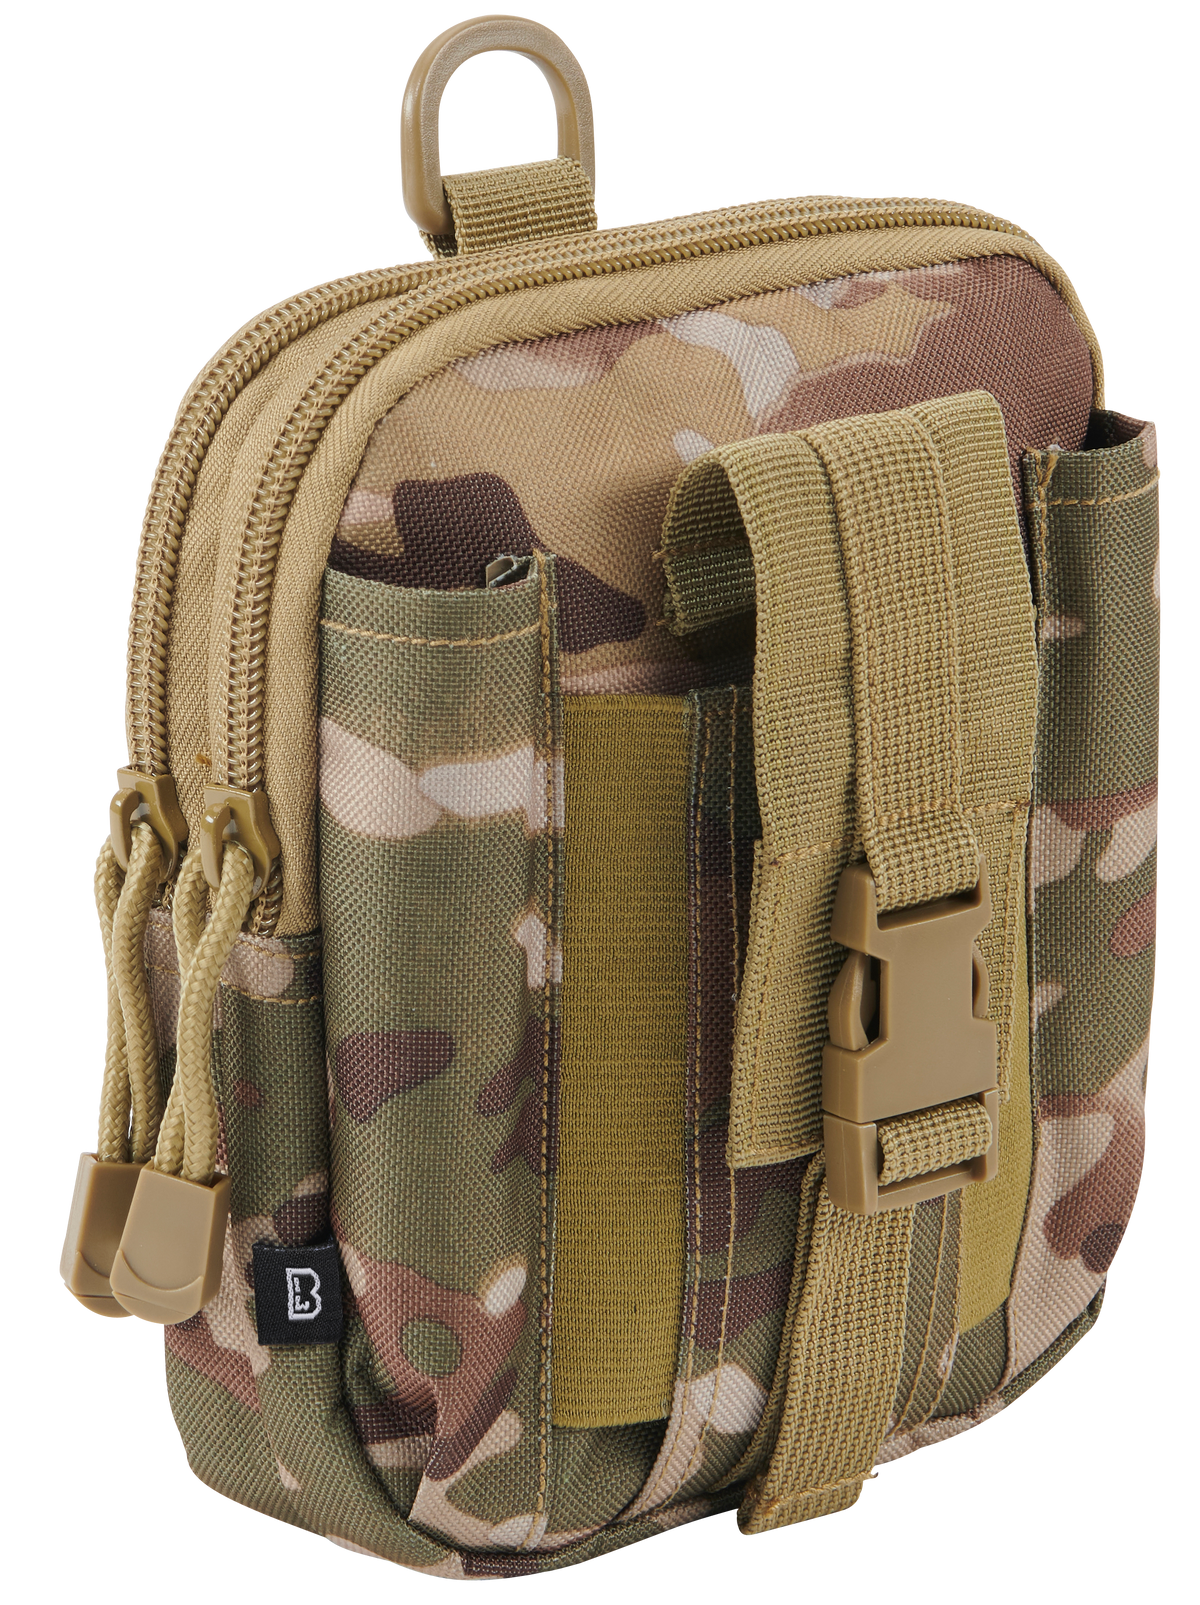 Husa Molle Pouch Functional Tactical Camo